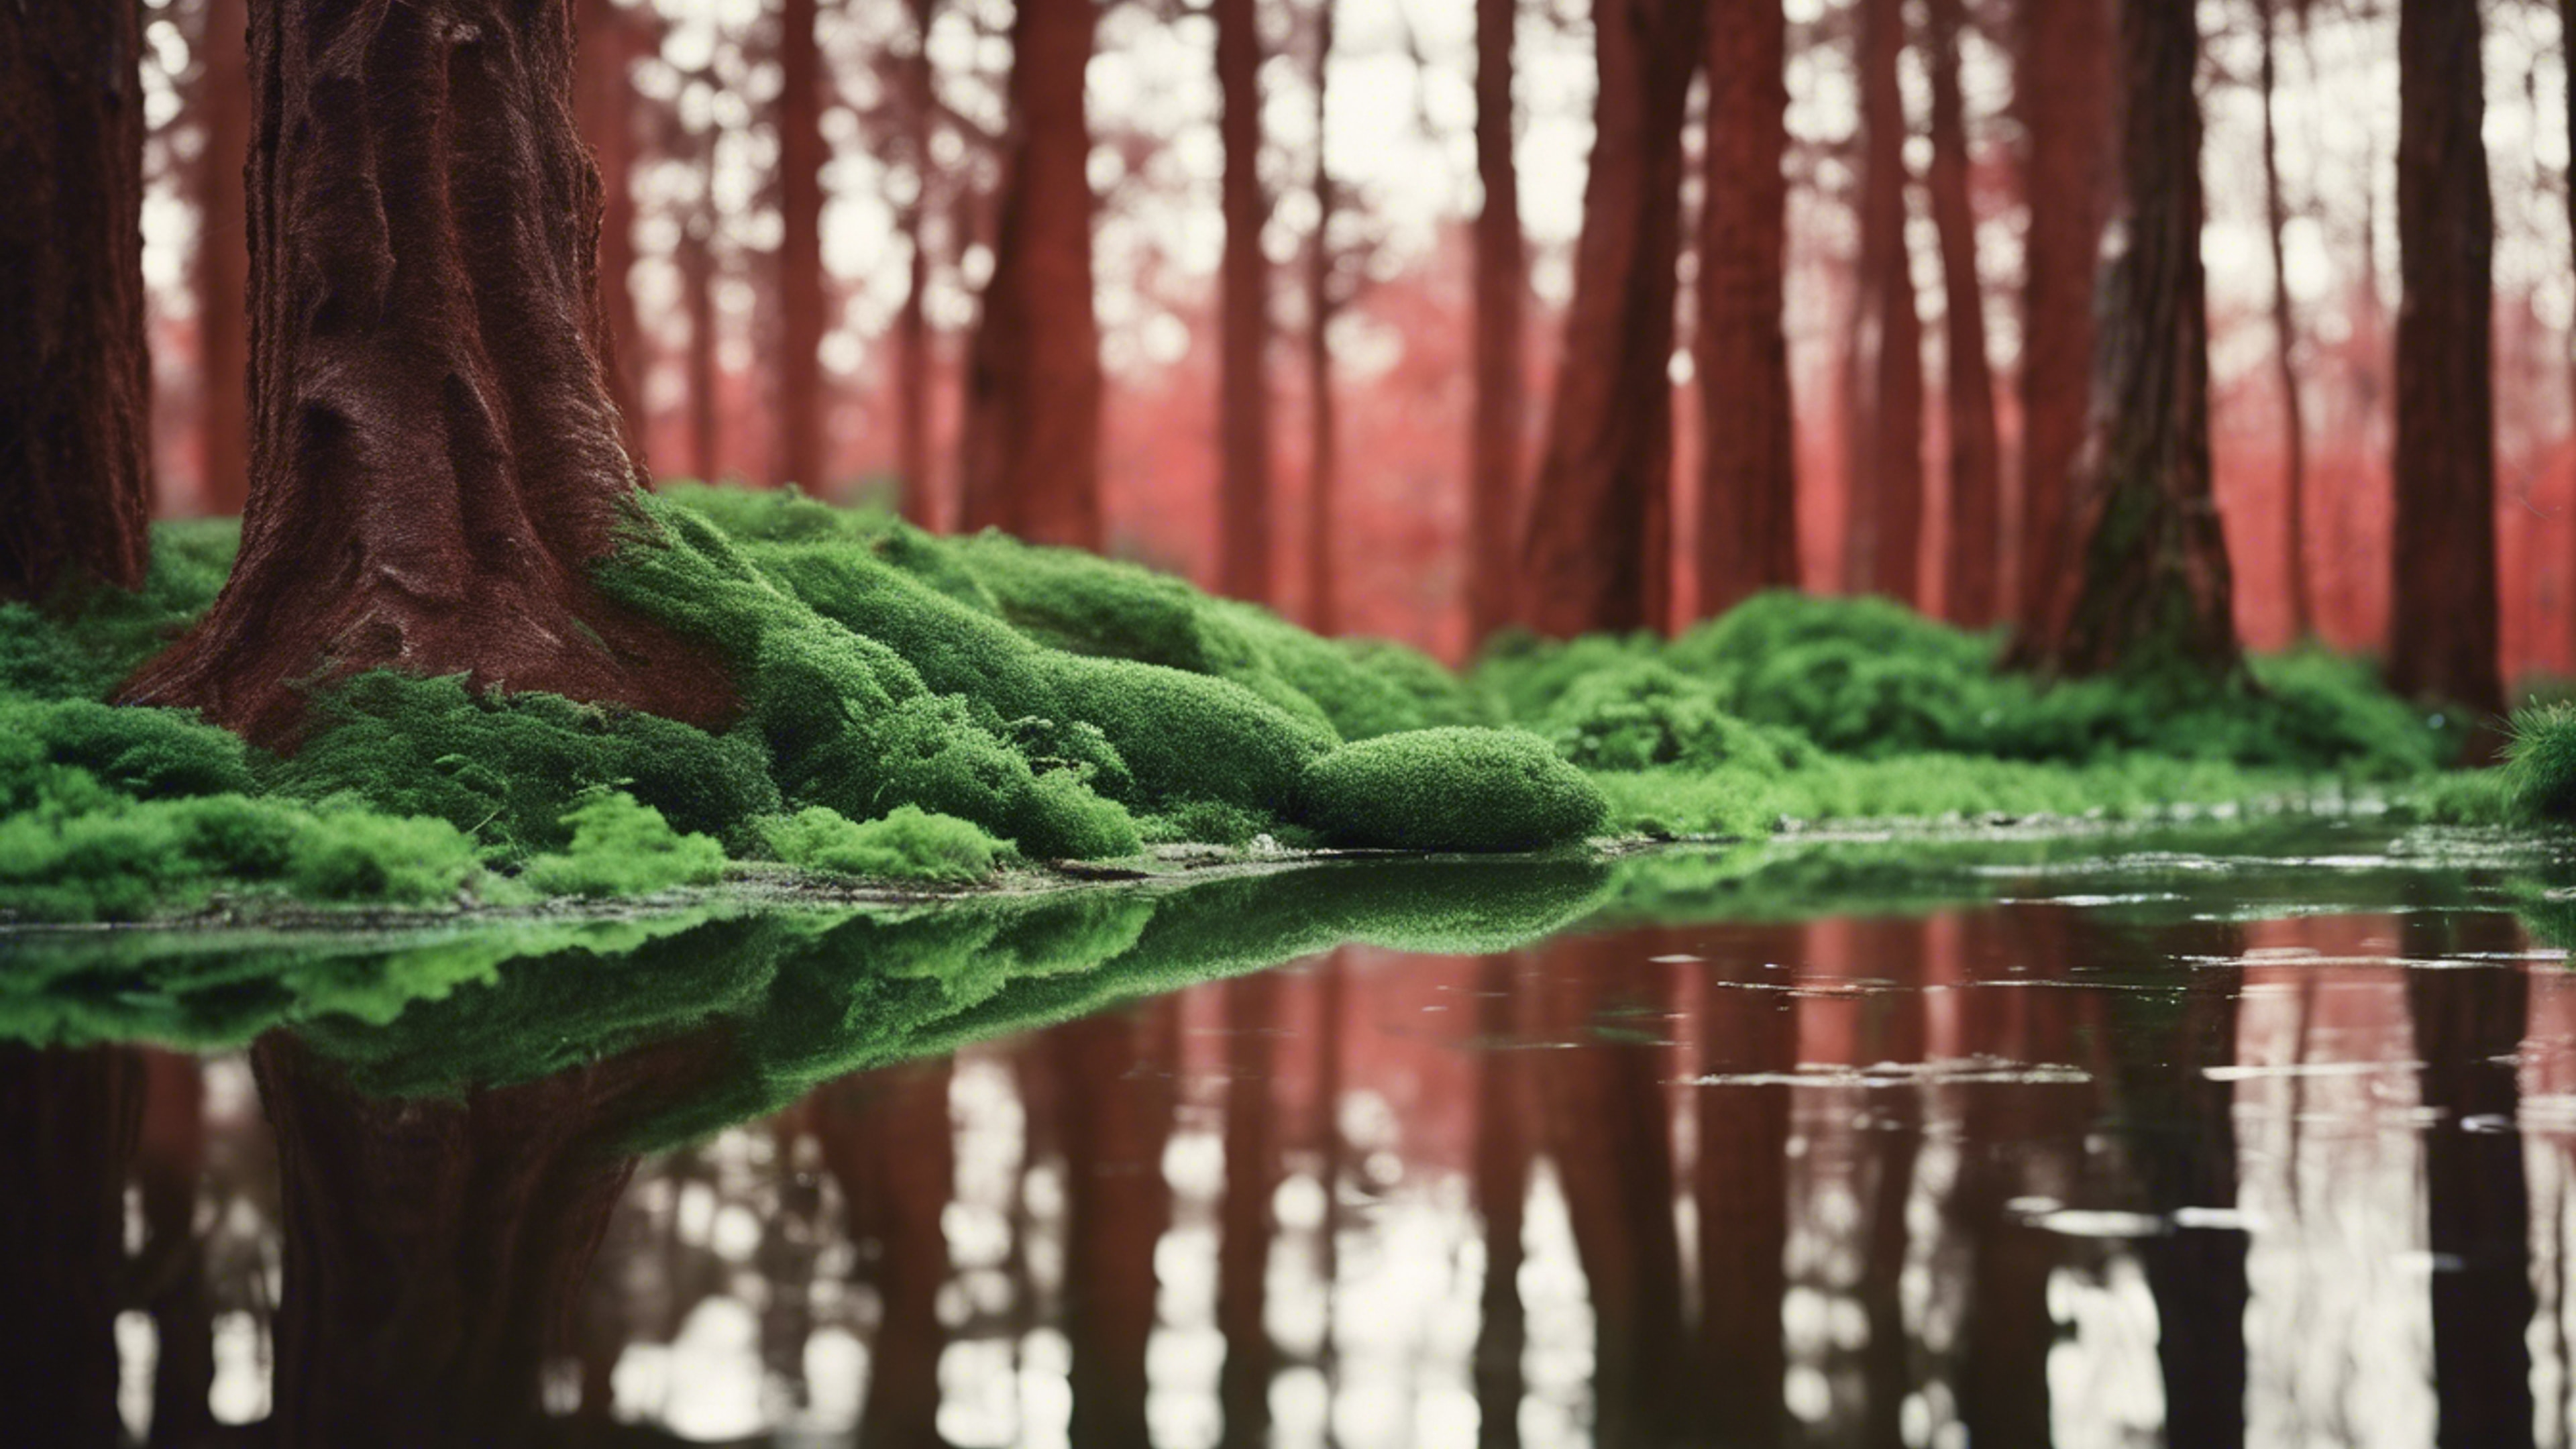 Lush, green forest reflections on a shiny, red leather surface. Ταπετσαρία[6f4e1618f75b40719461]